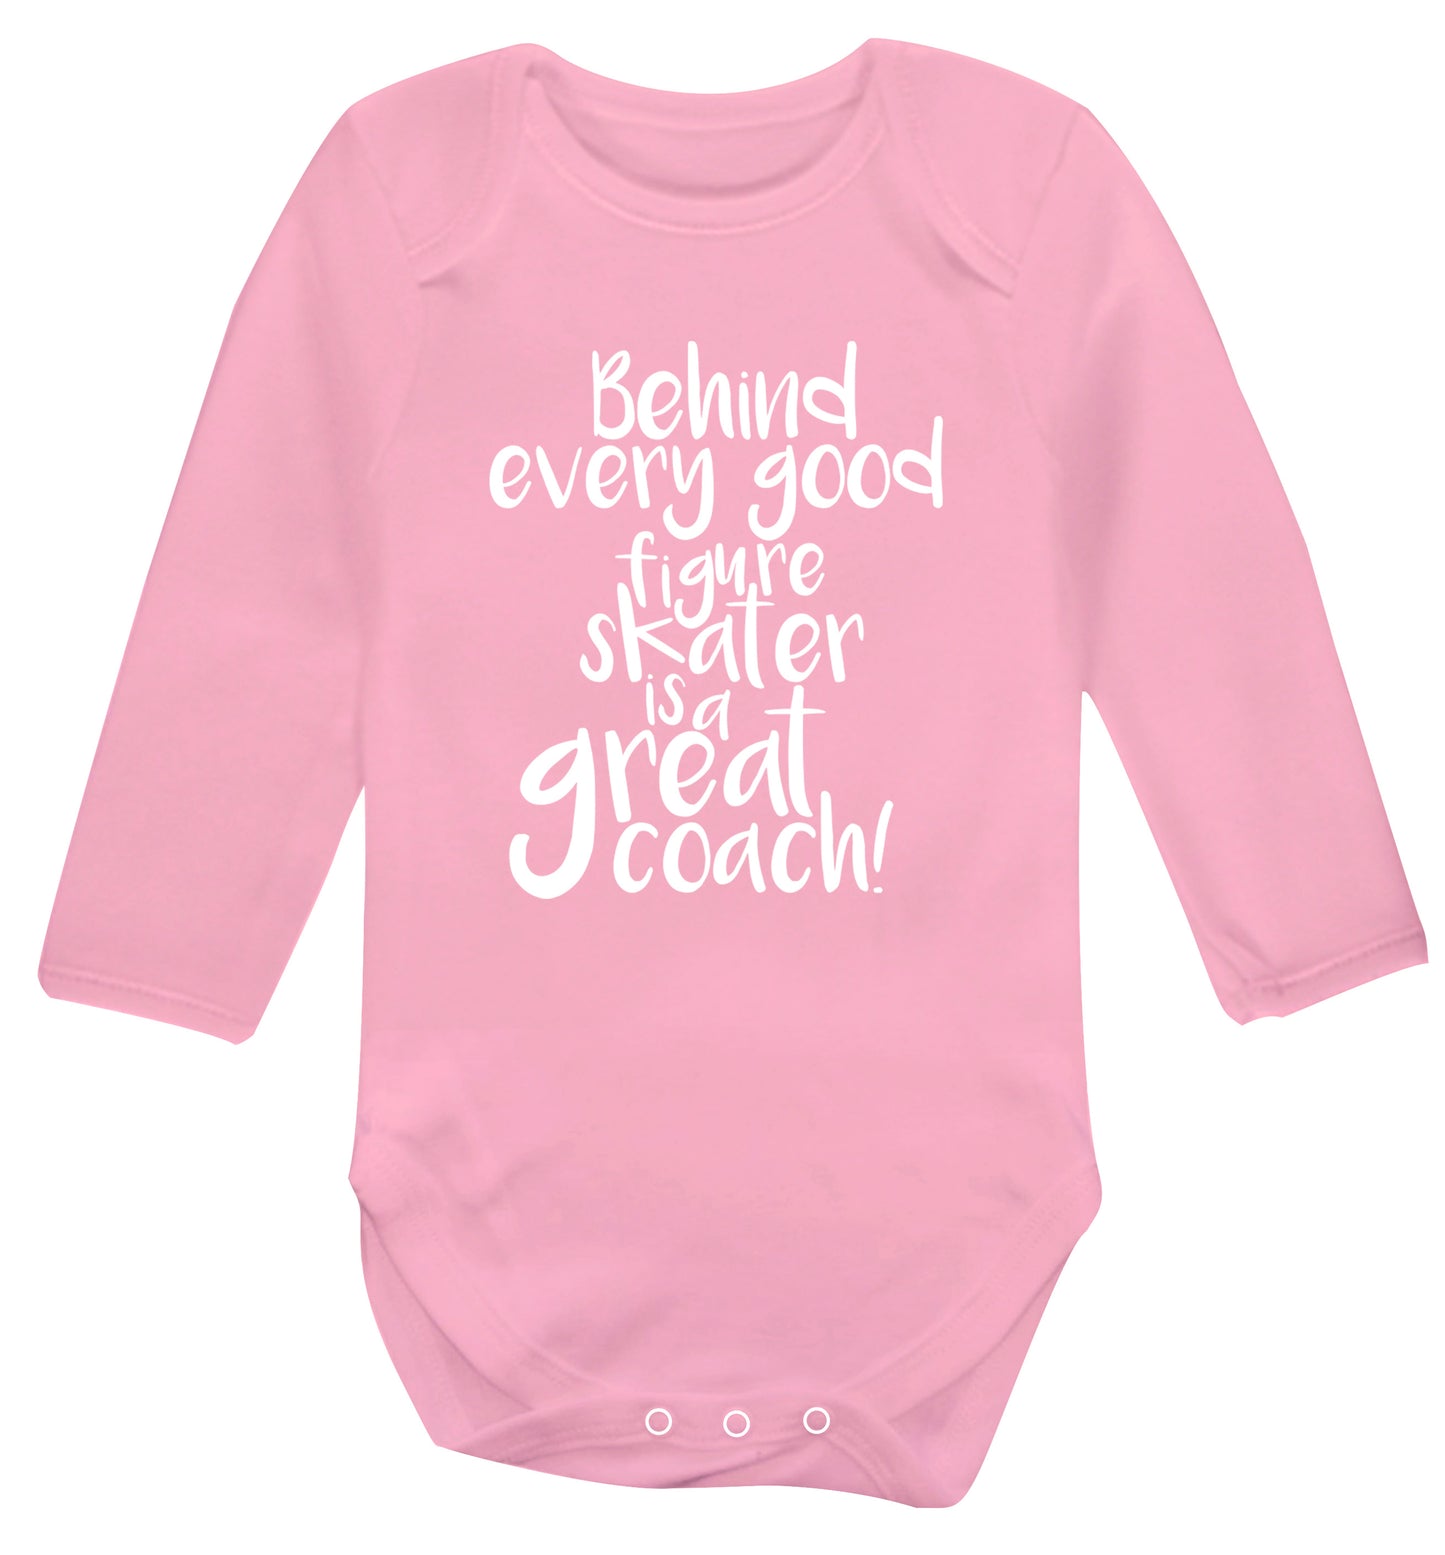 Behind every good figure skater is a great coach Baby Vest long sleeved pale pink 6-12 months